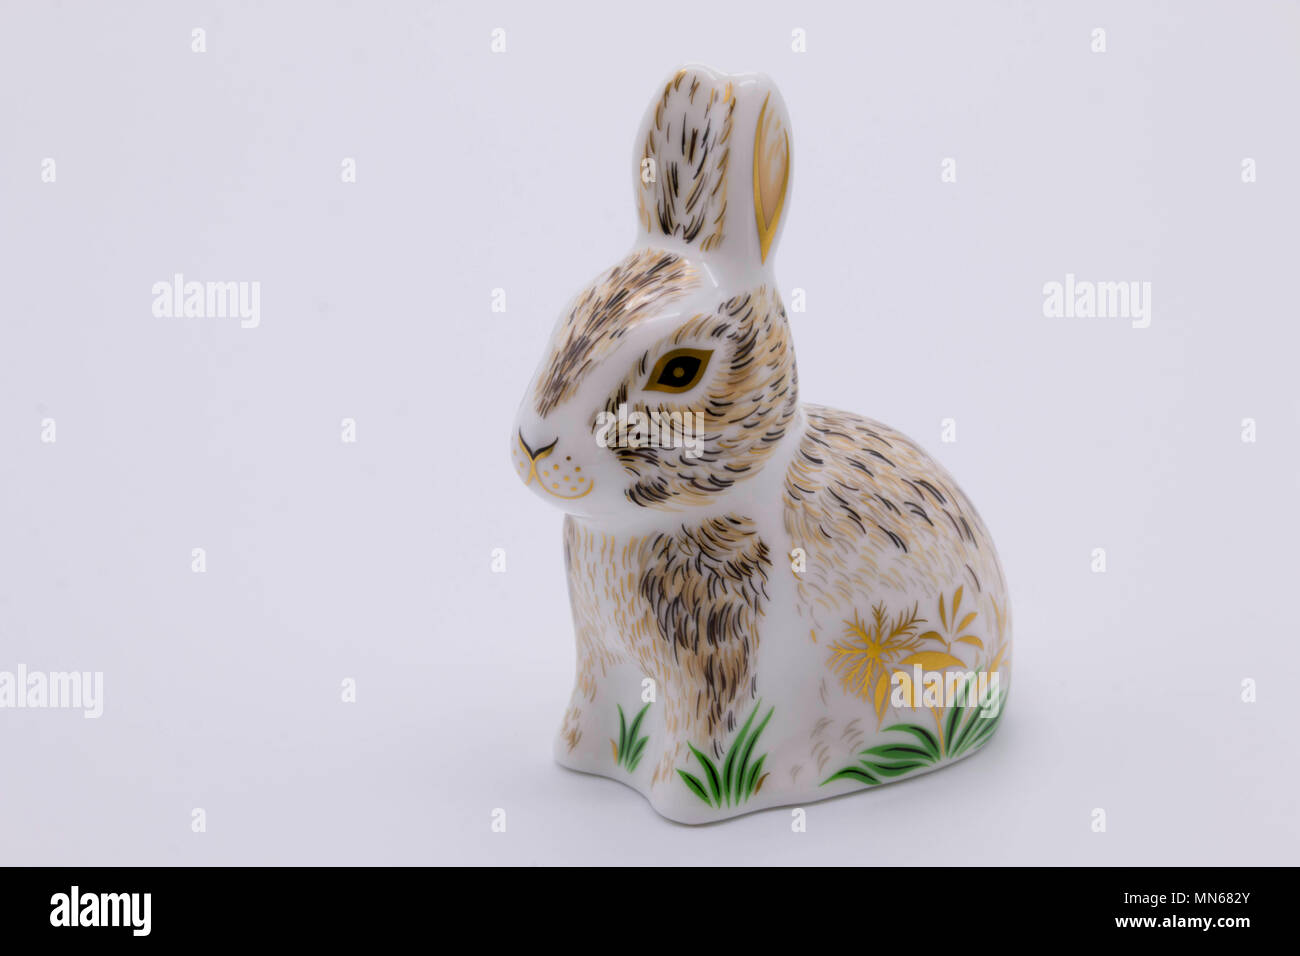 Royal Crown Derby bone china paperweight of a rabbit uk Stock Photo